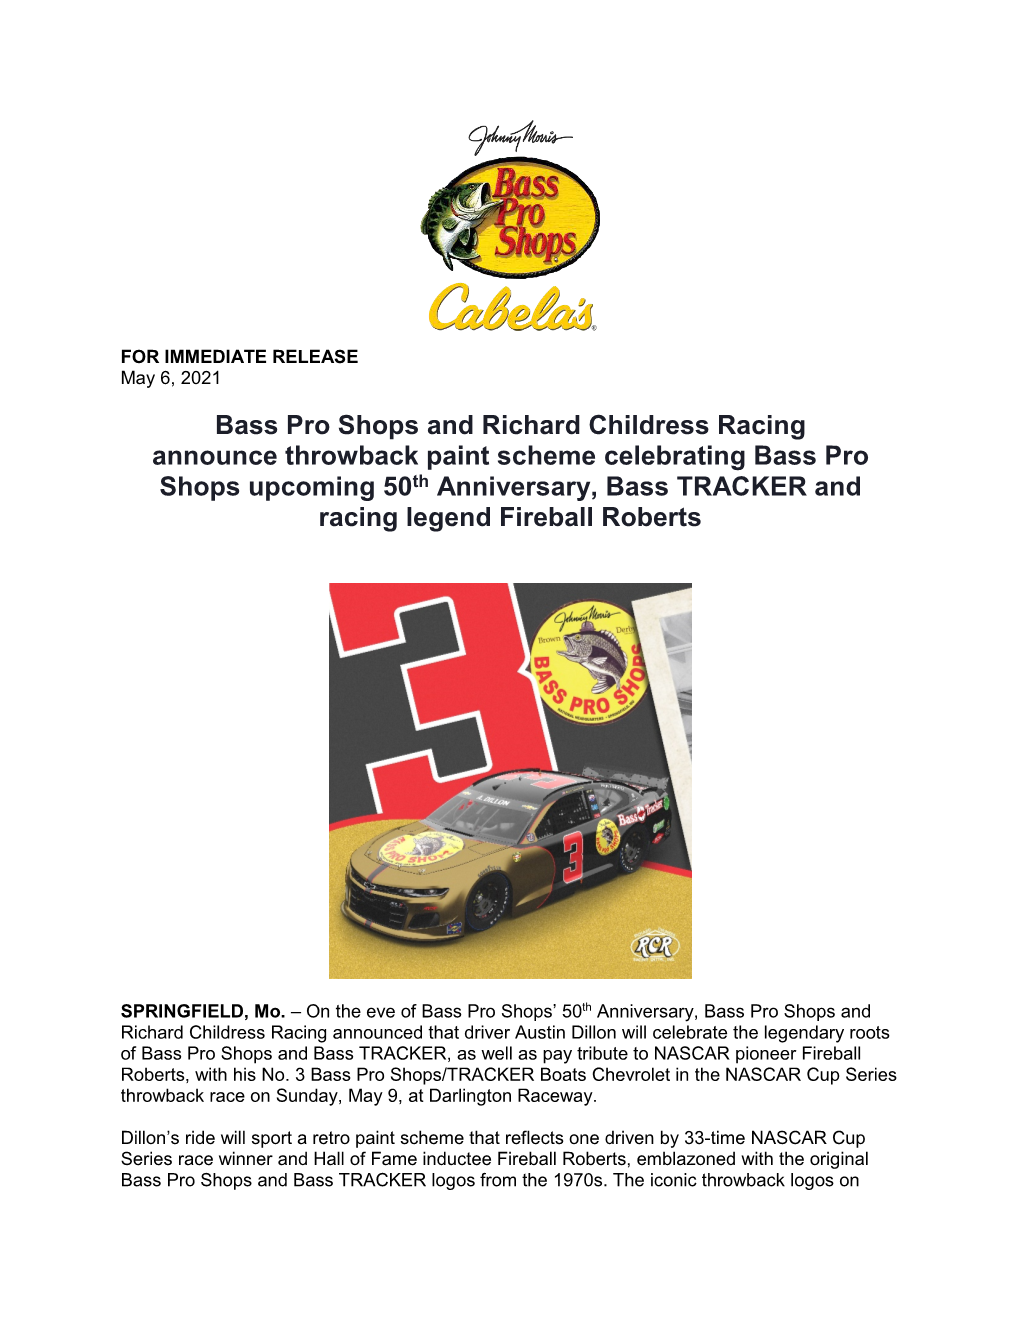 Bass Pro Shops and Richard Childress Racing Announce